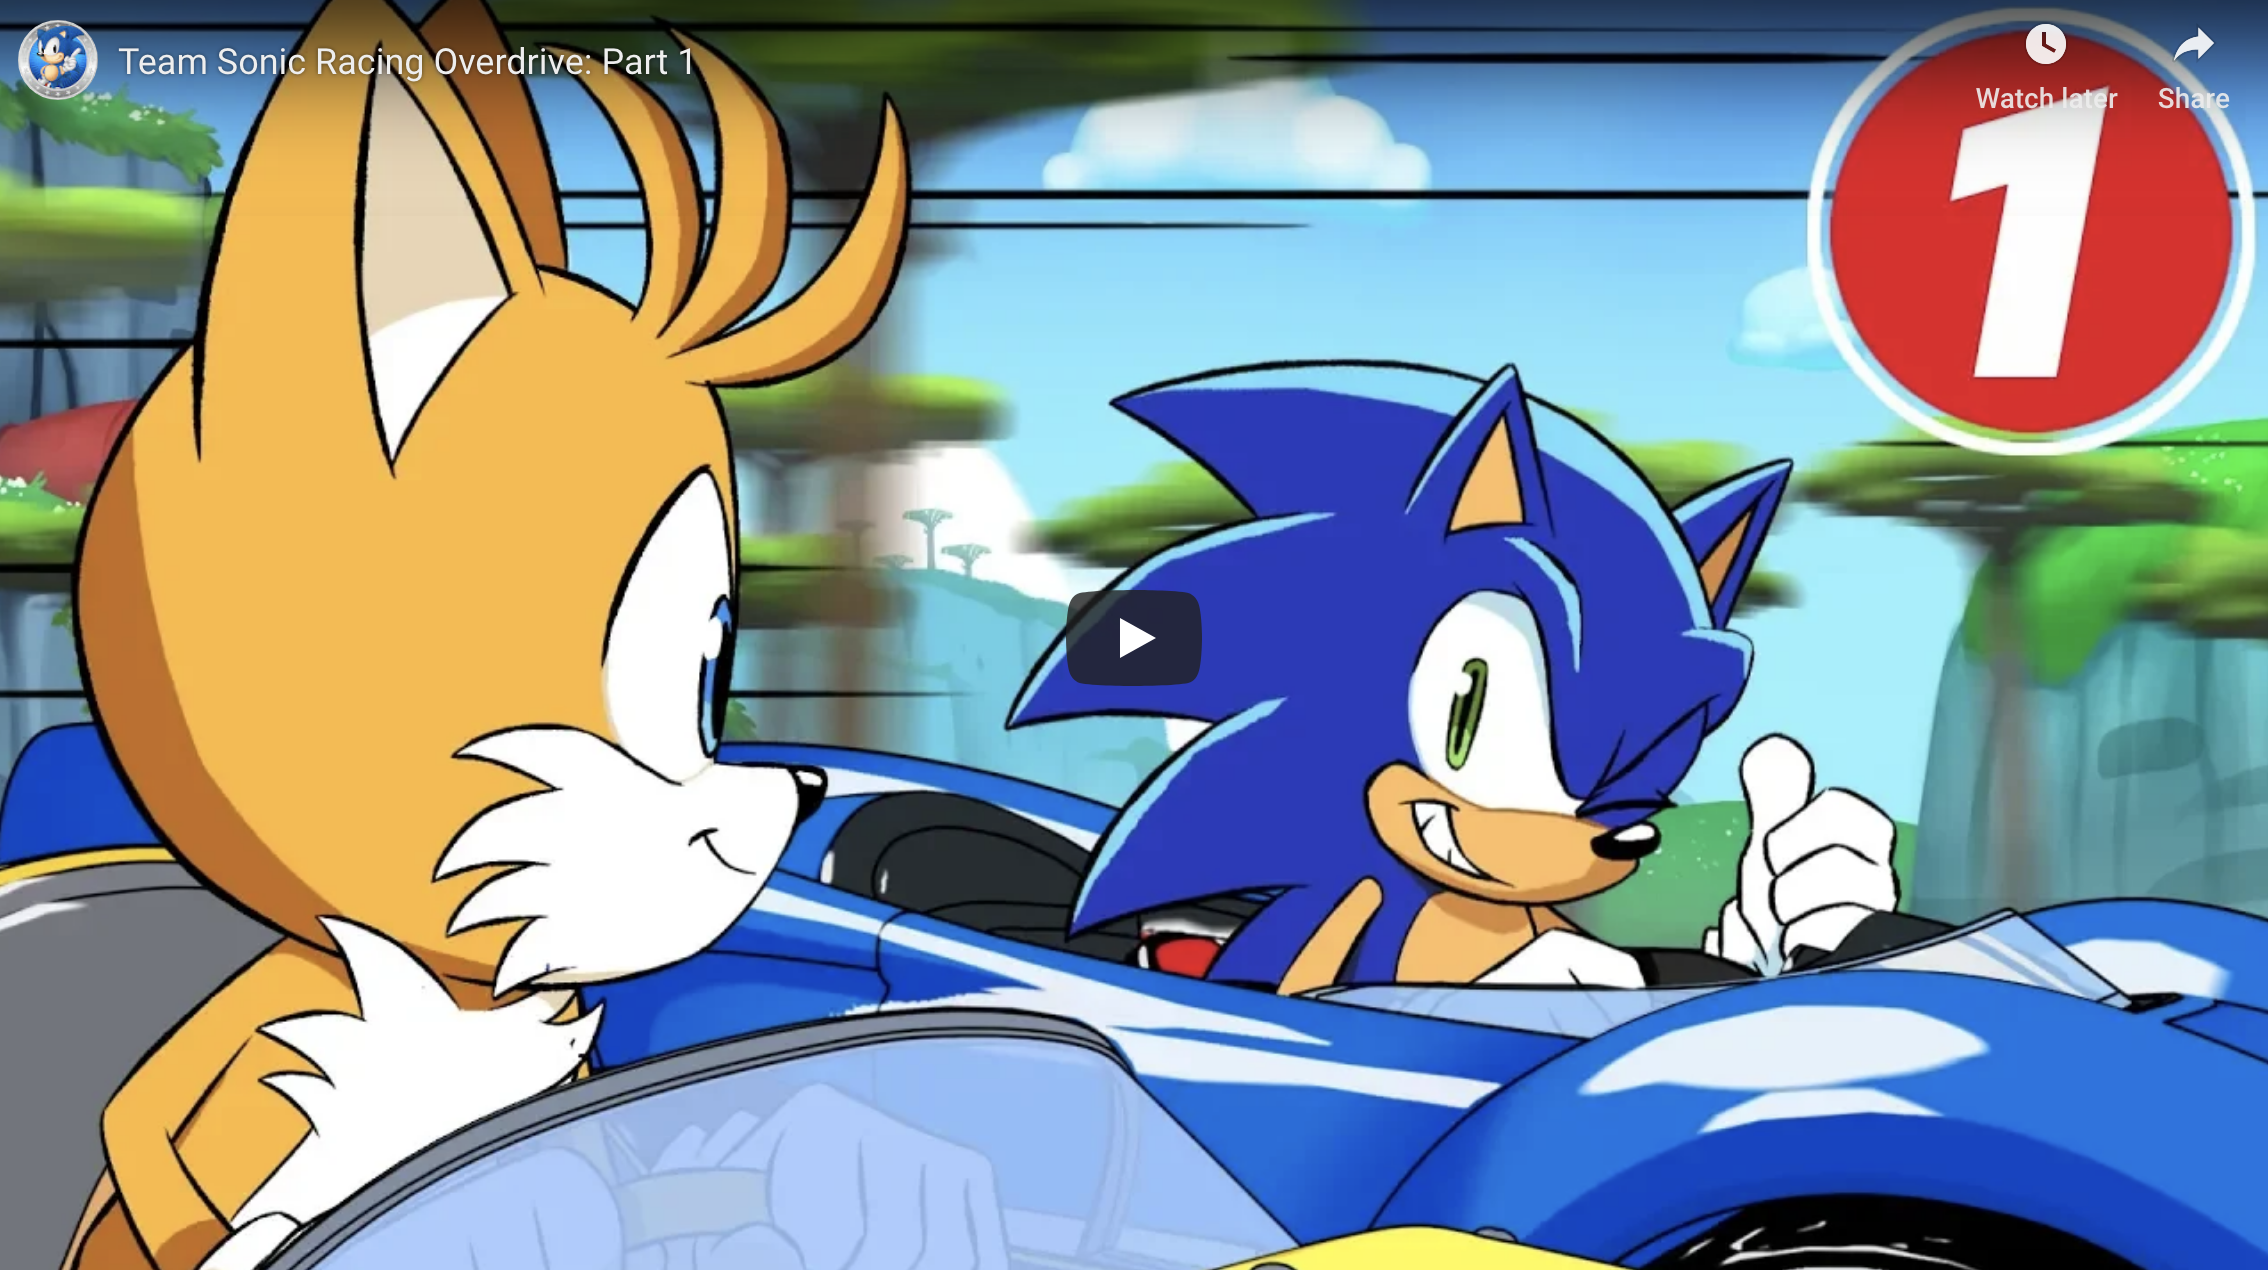 Sonic @ SXSW: Team Sonic Racing: Overdrive 2-part animation announced – watch part 1 ...